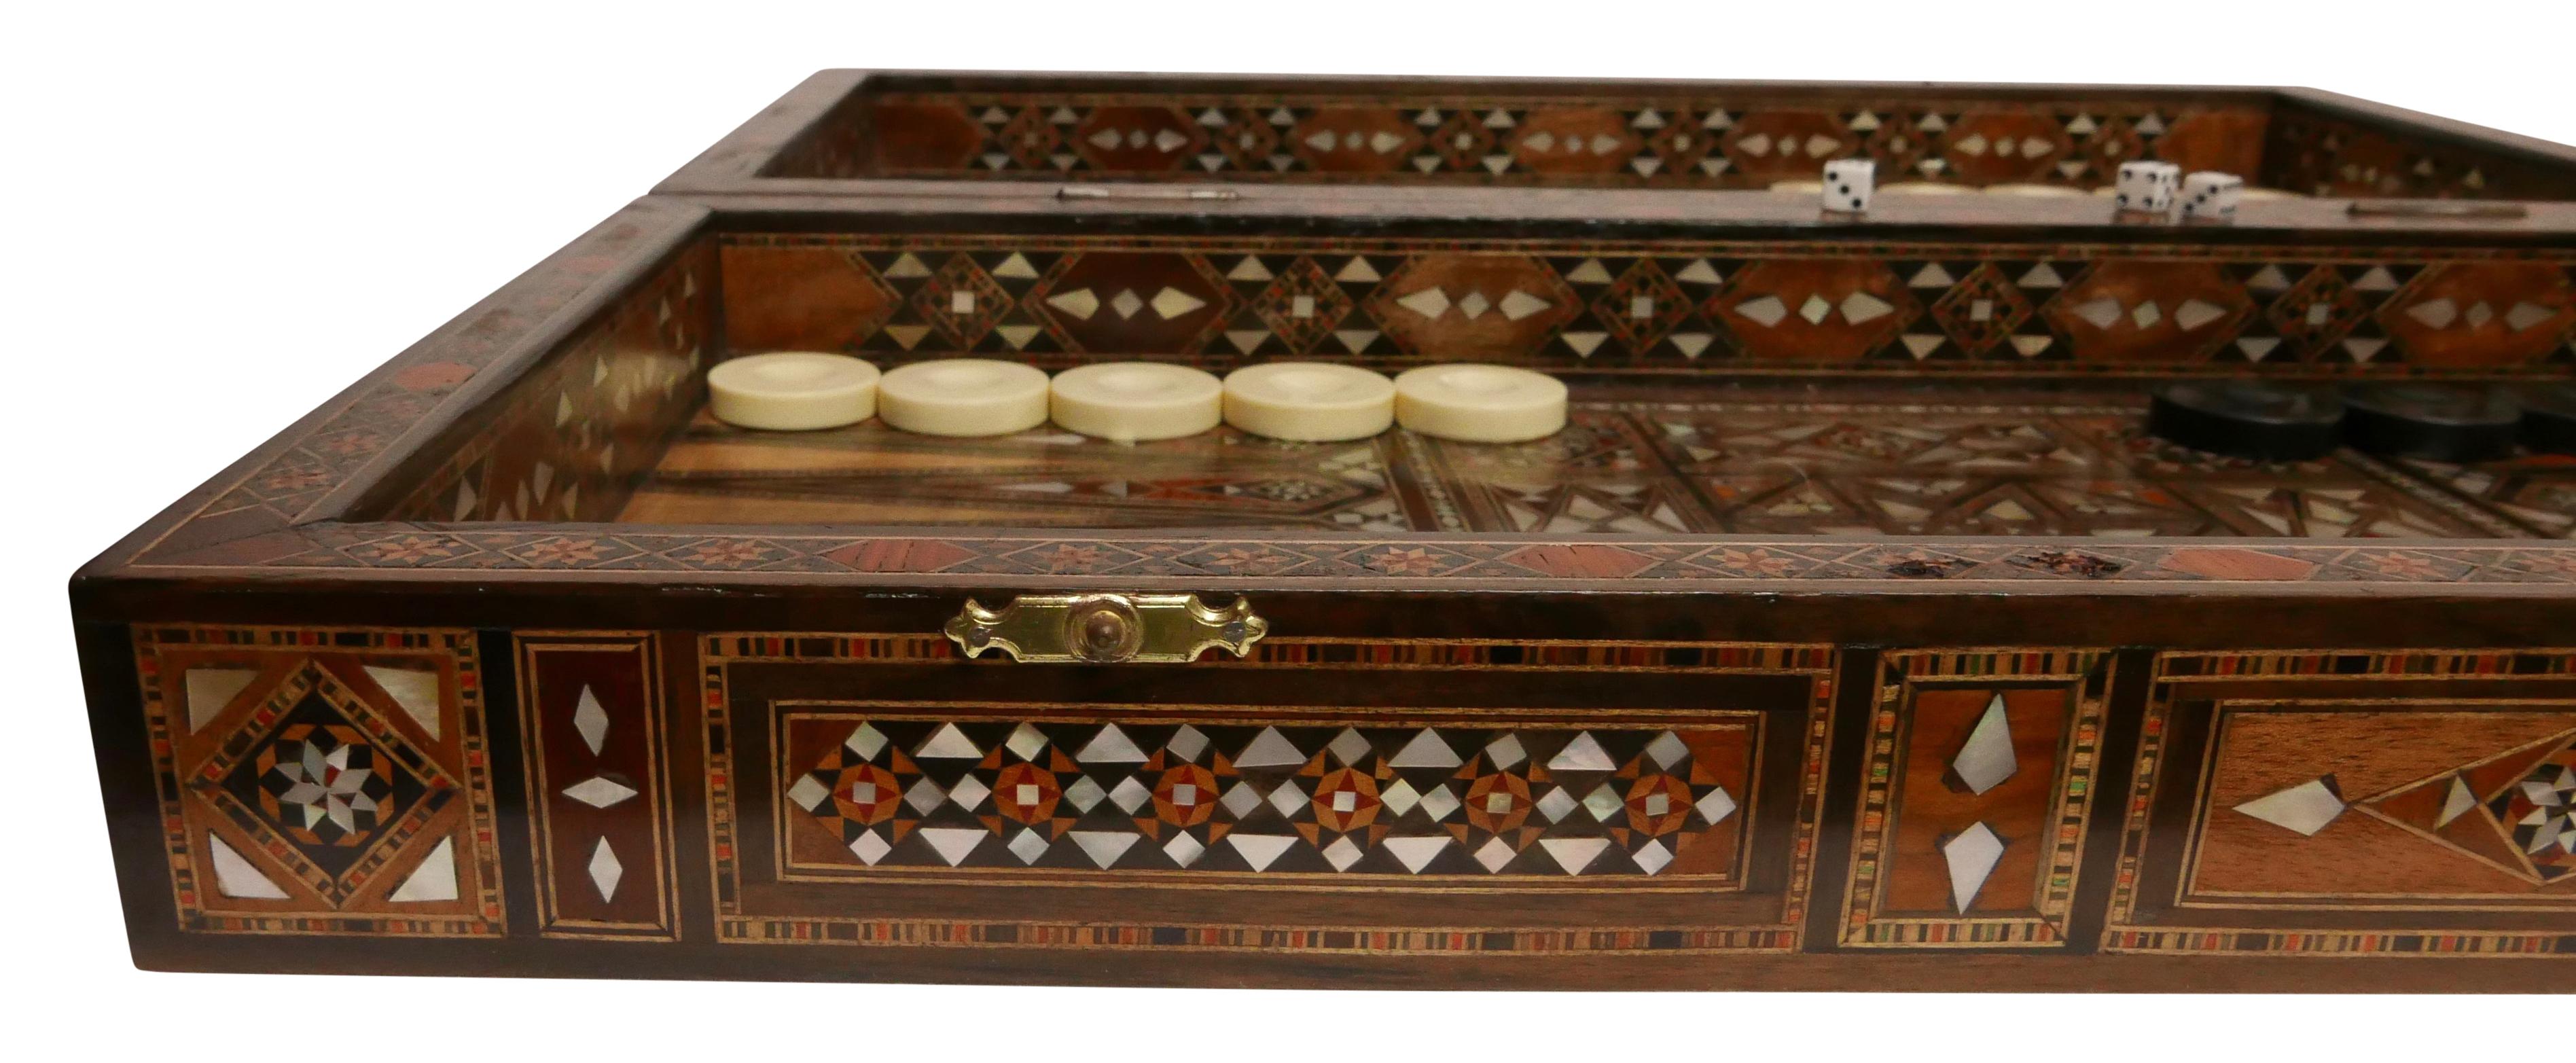 Syrian Inlaid Marquetry Mosaic Backgammon and Chess Game Box 2